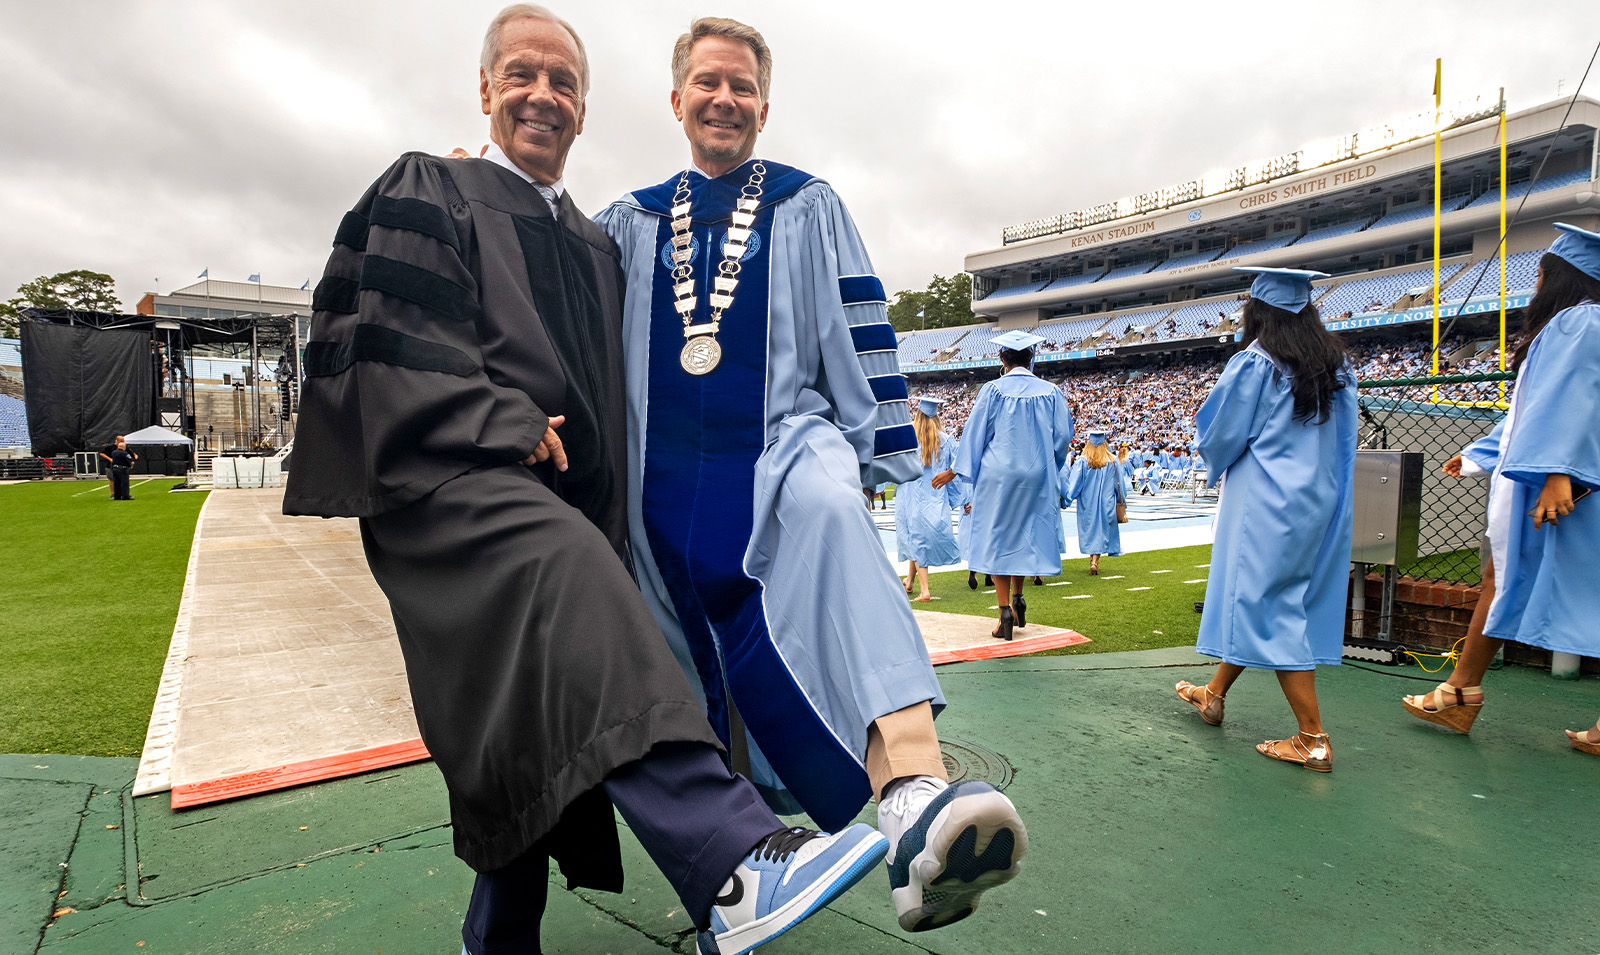 Chancellor Kevin M. Guskiewicz and former Tar Heels basketball coach Roy Williams in regalia at a graduation ceremony showing off their basketball shoes.